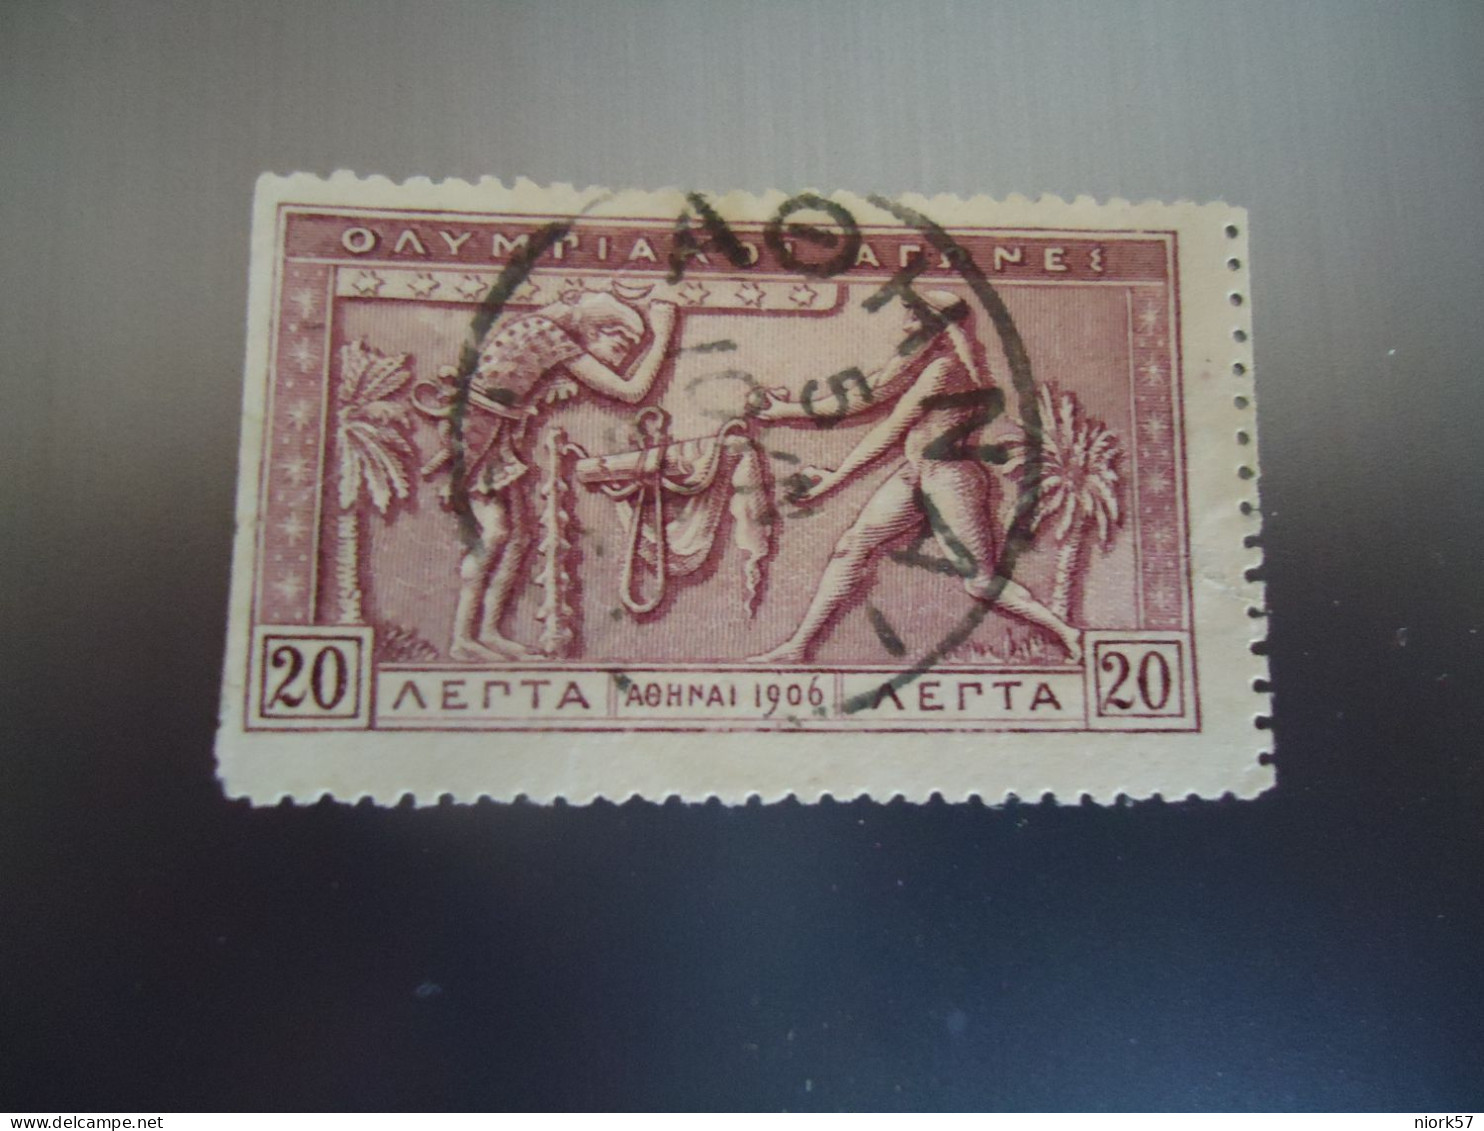 GREECE USED STAMPS OLYMPIC GAMES 1906   POSΤMARK  ΑΘΗΝΑ - Poststempel - Freistempel